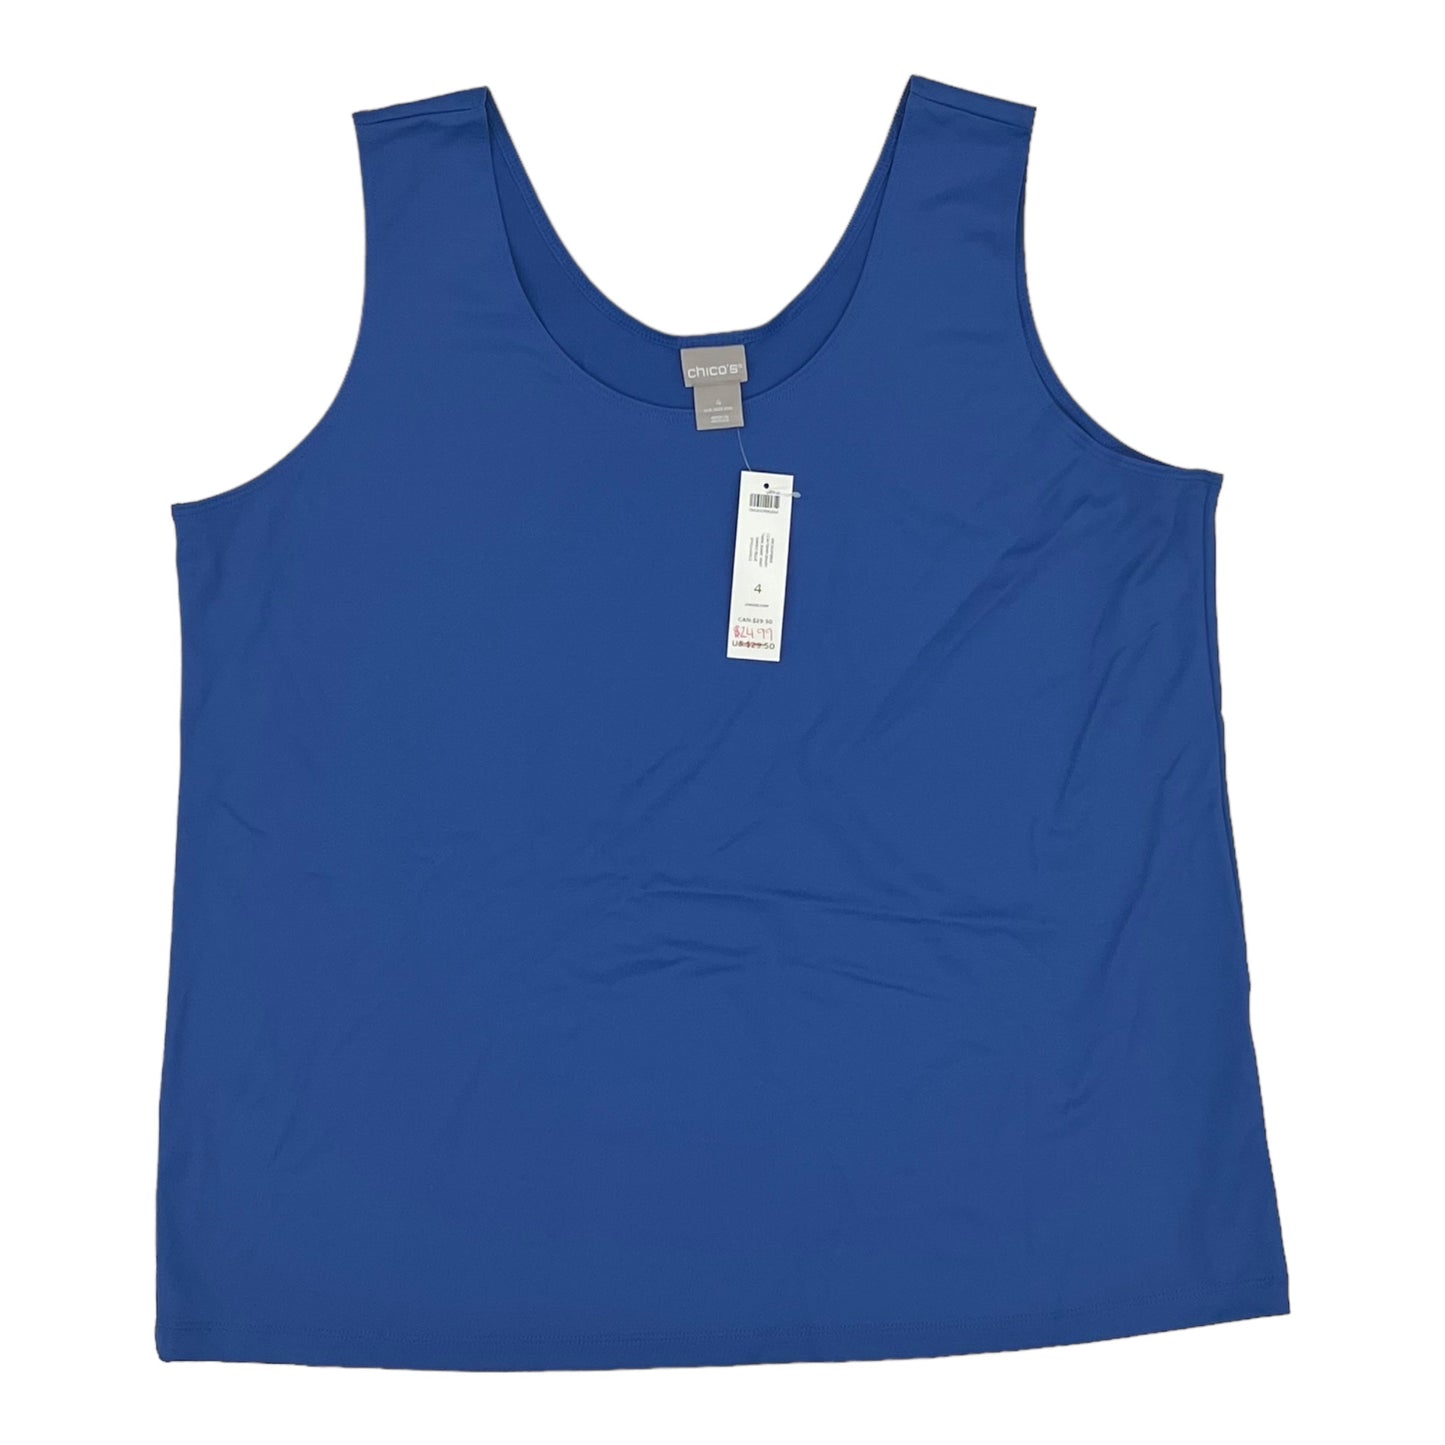 BLUE CHICOS TANK TOP, Size 2X